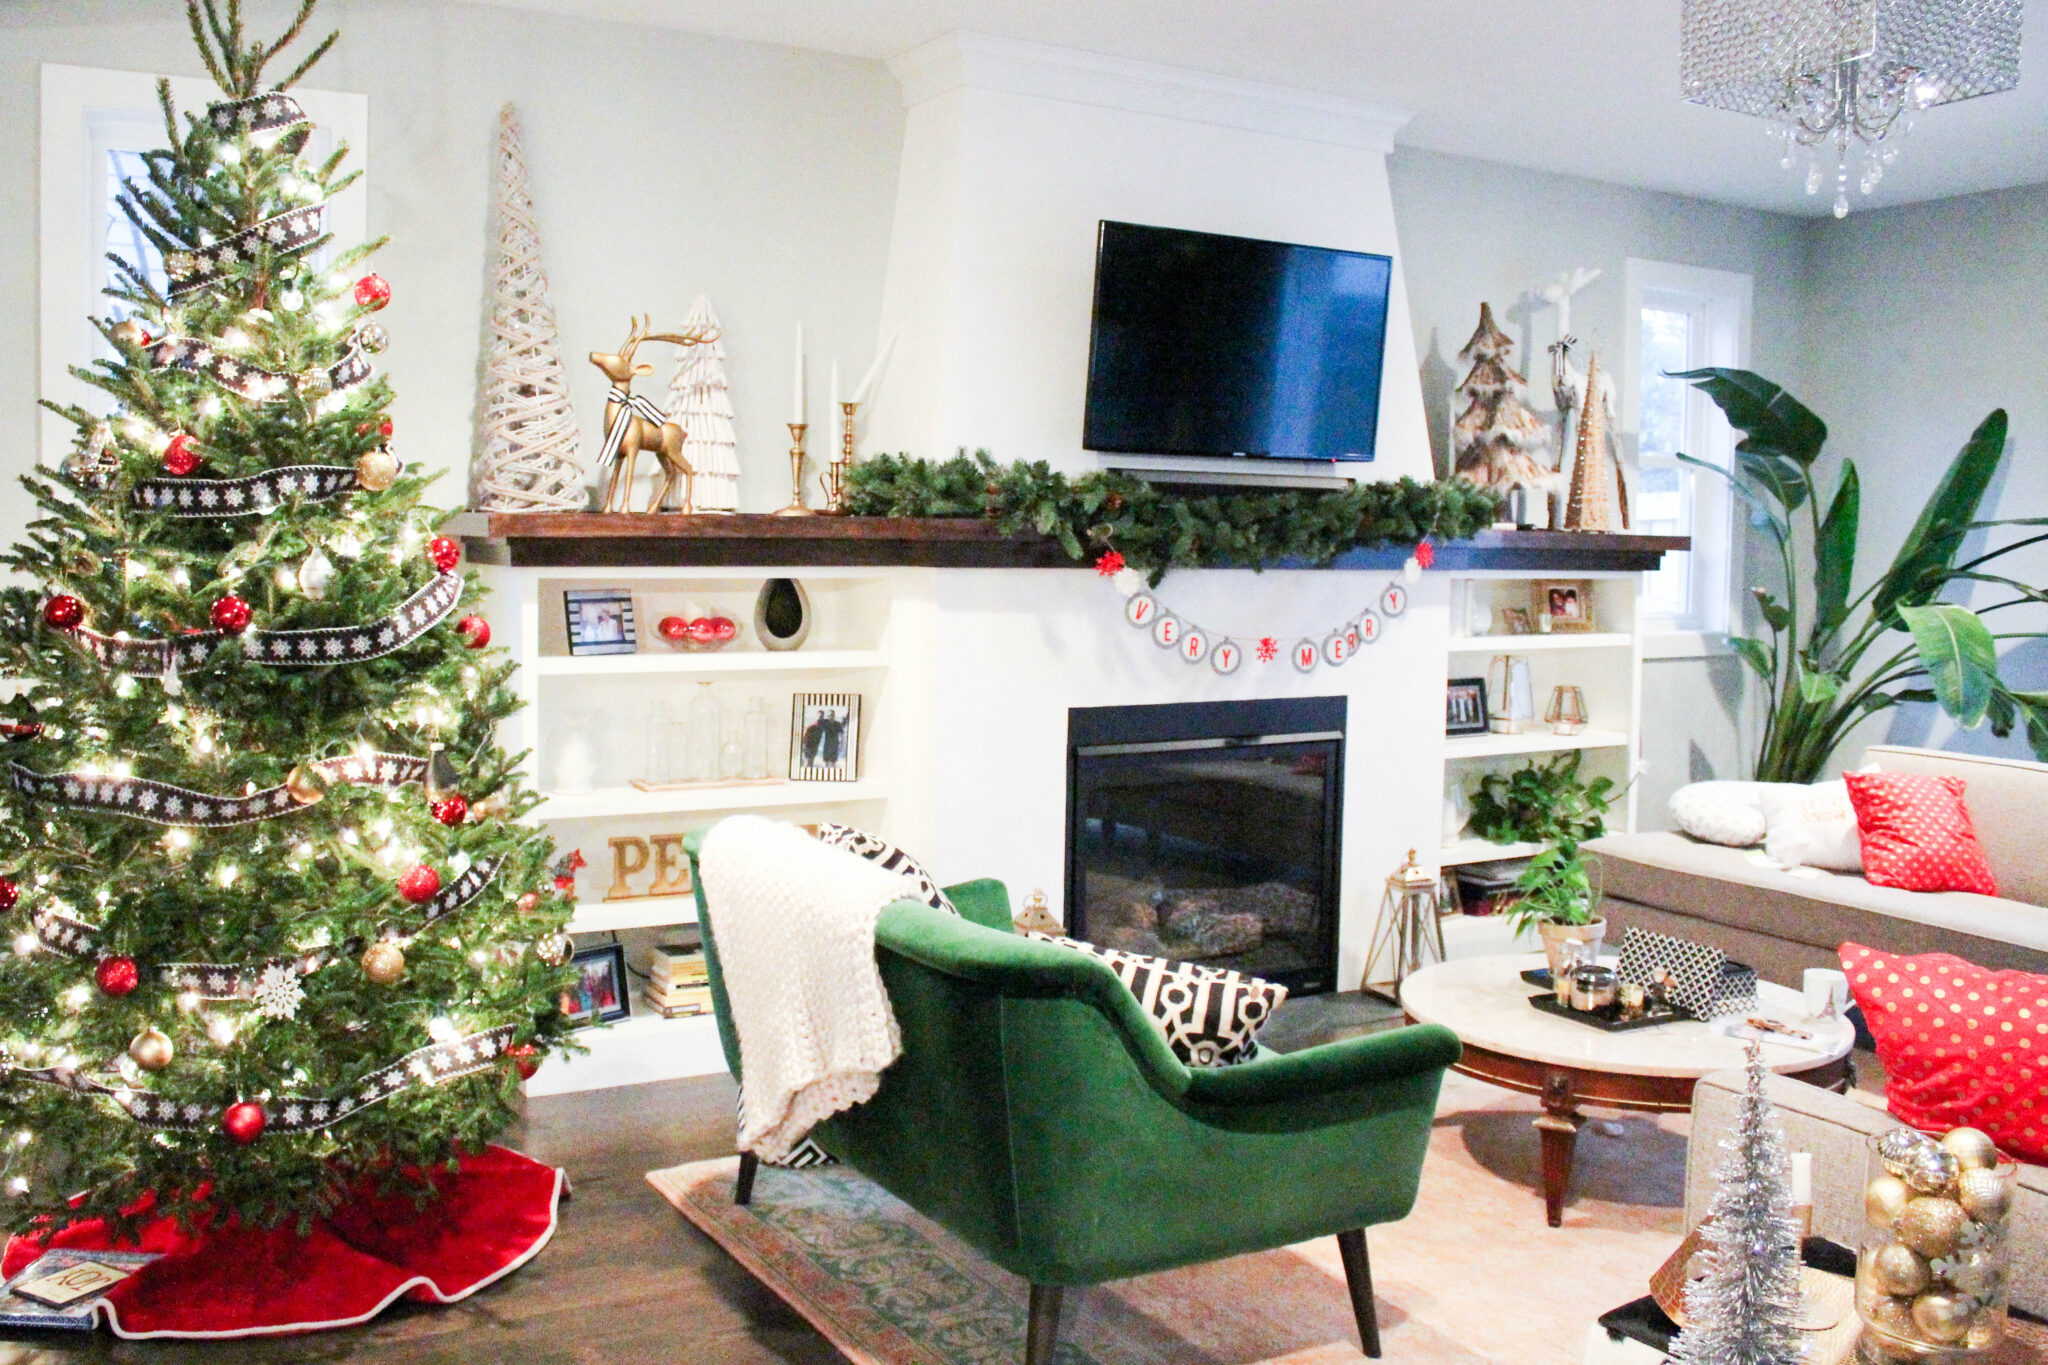 Living room with classic red and green Christmas decorations